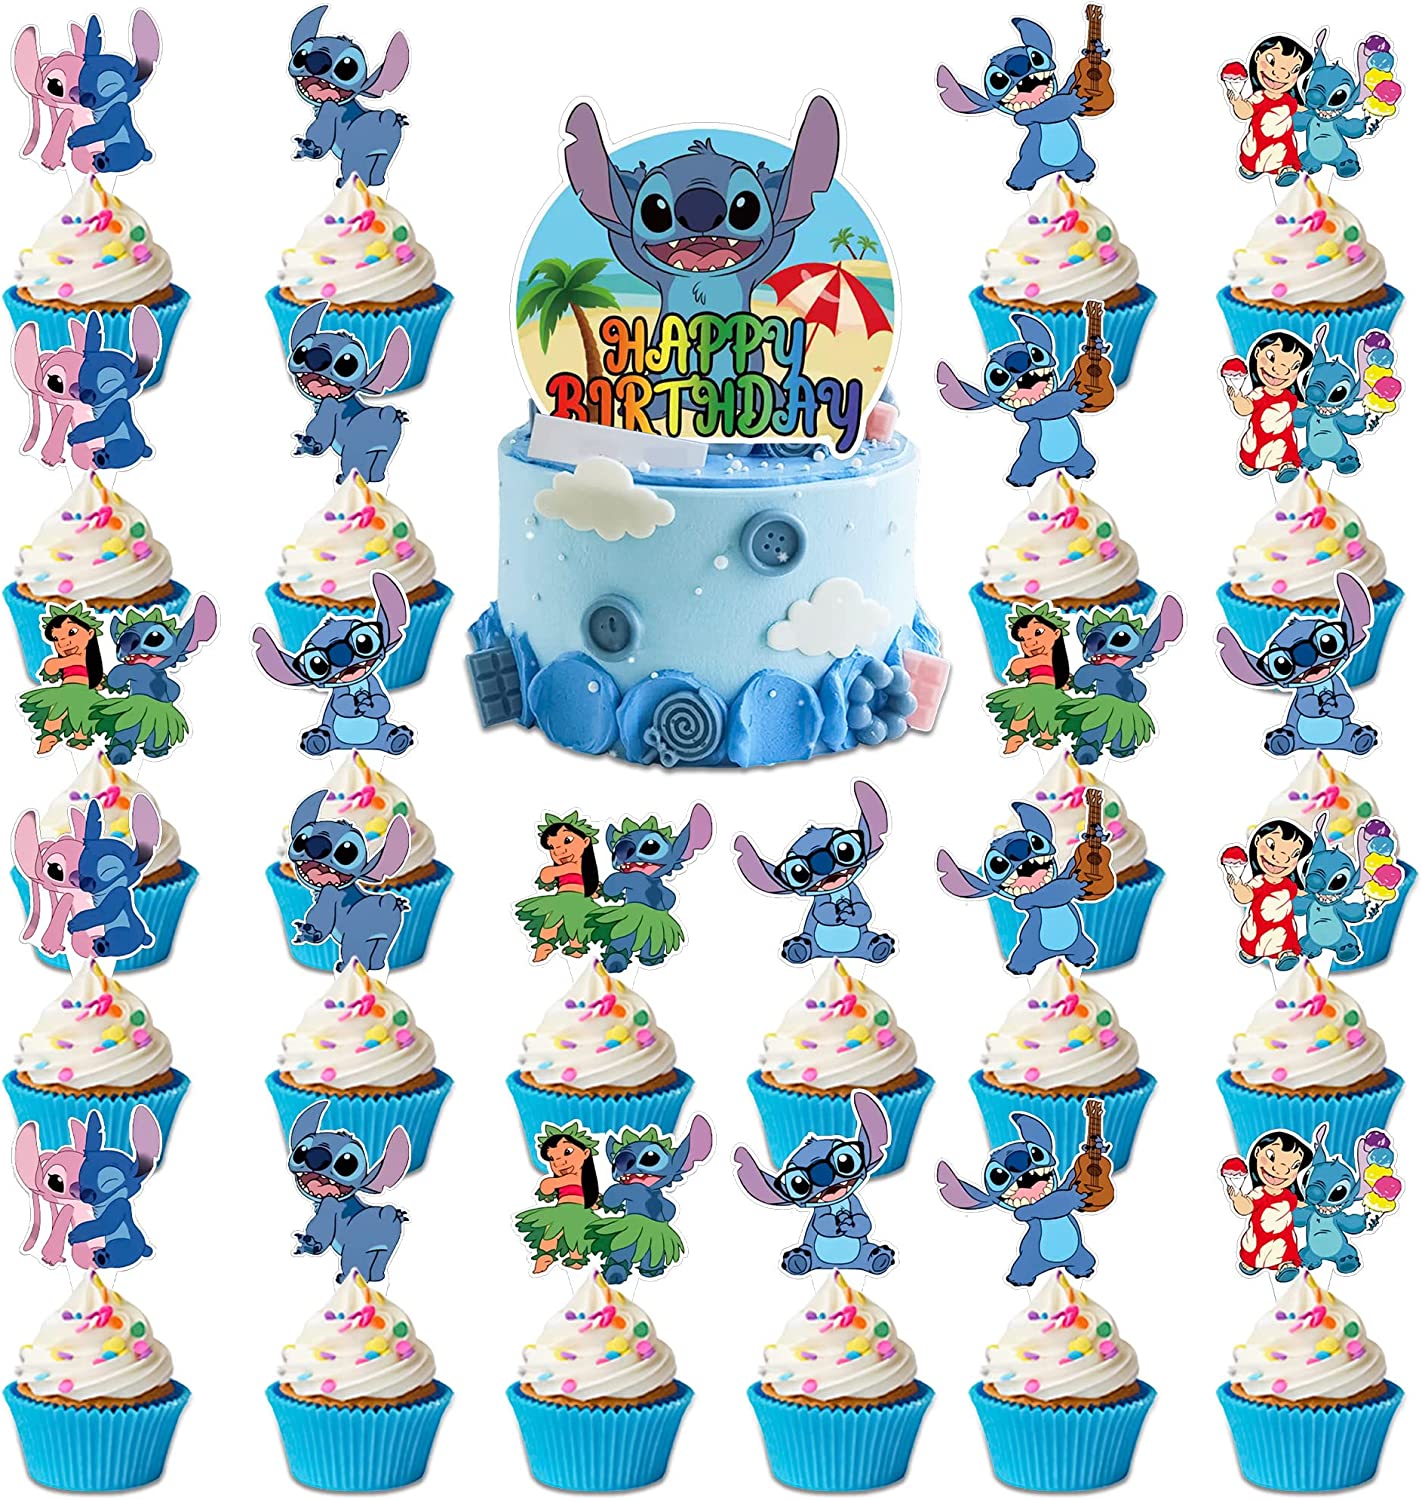 24pcs Lilo and Stitch Cake Toppers Cupcake Toppers Cake Decorations Lilo  and Stitch Birthday Party Supplies Decorations (24pcs)